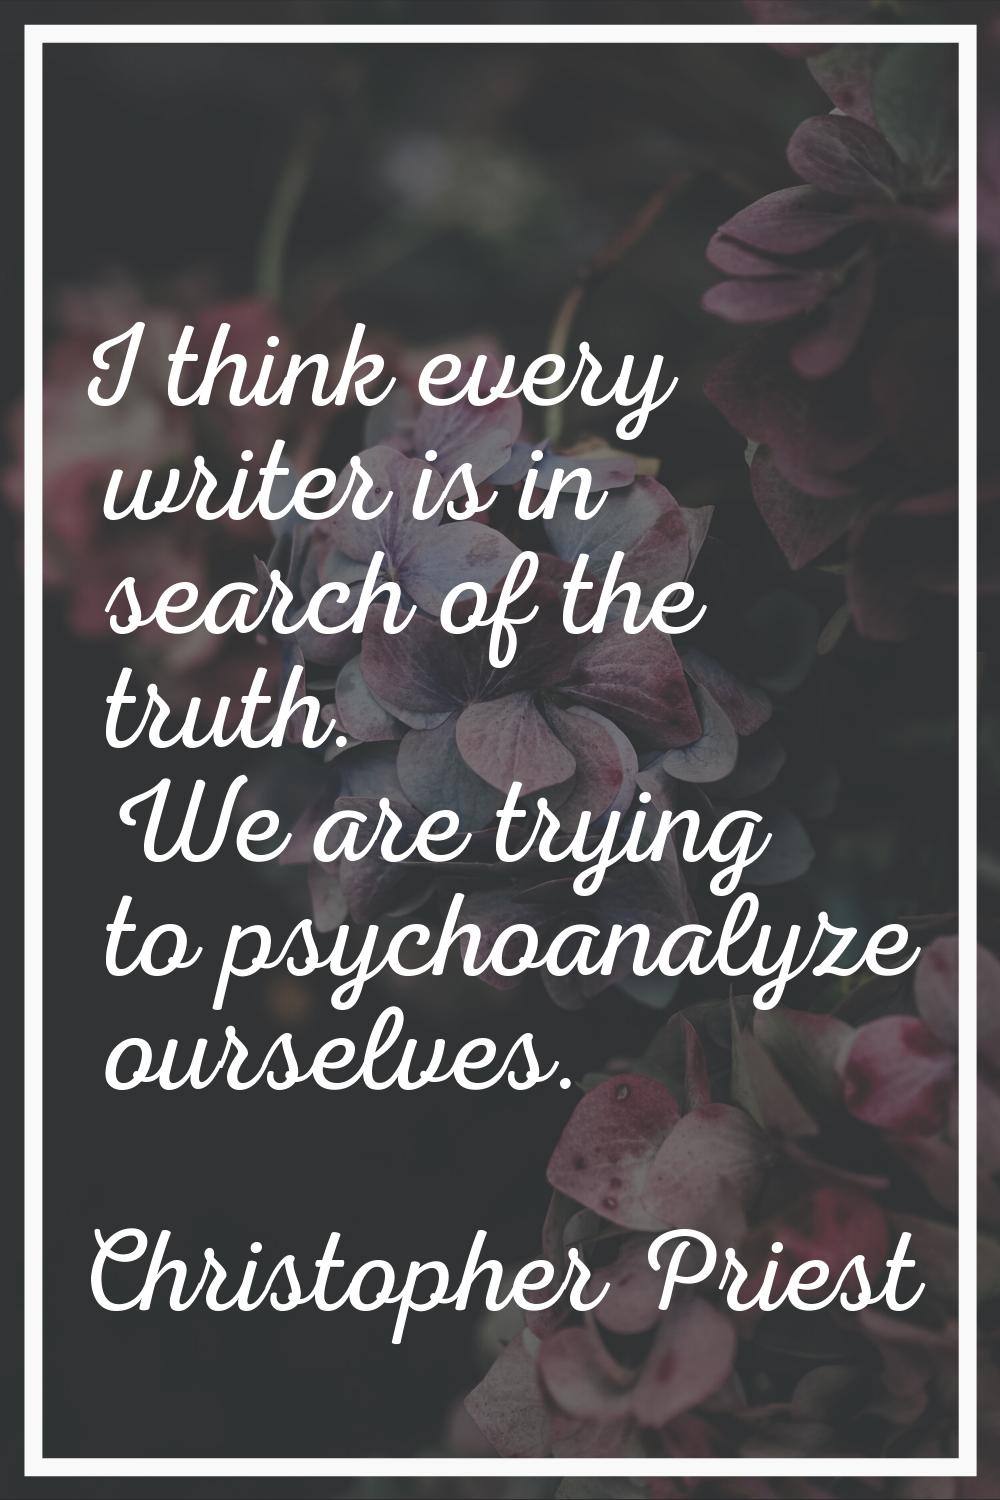 I think every writer is in search of the truth. We are trying to psychoanalyze ourselves.